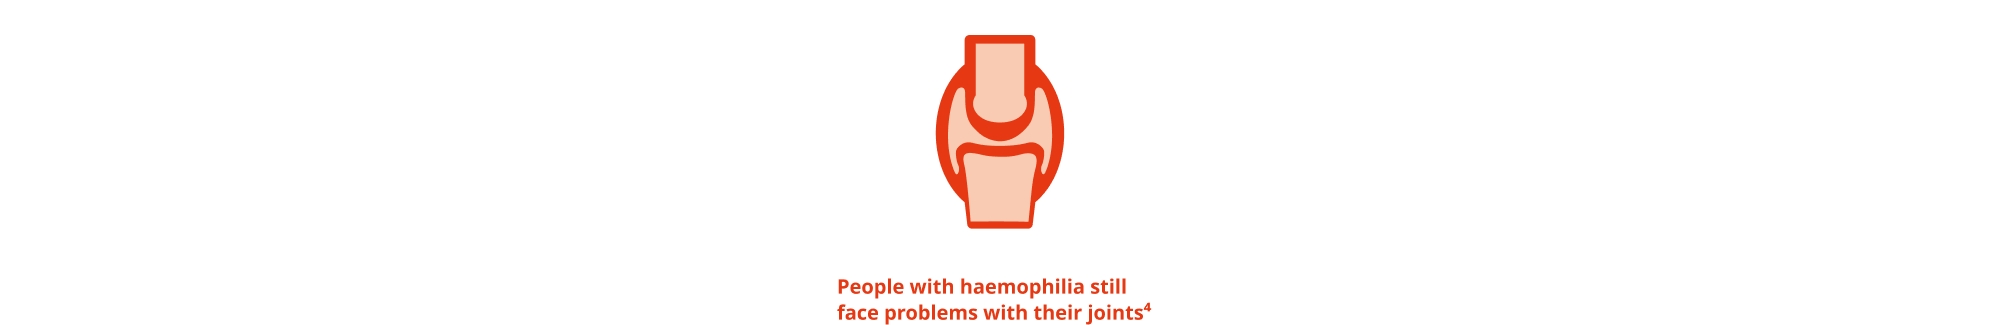 People with haemophilia still face problems